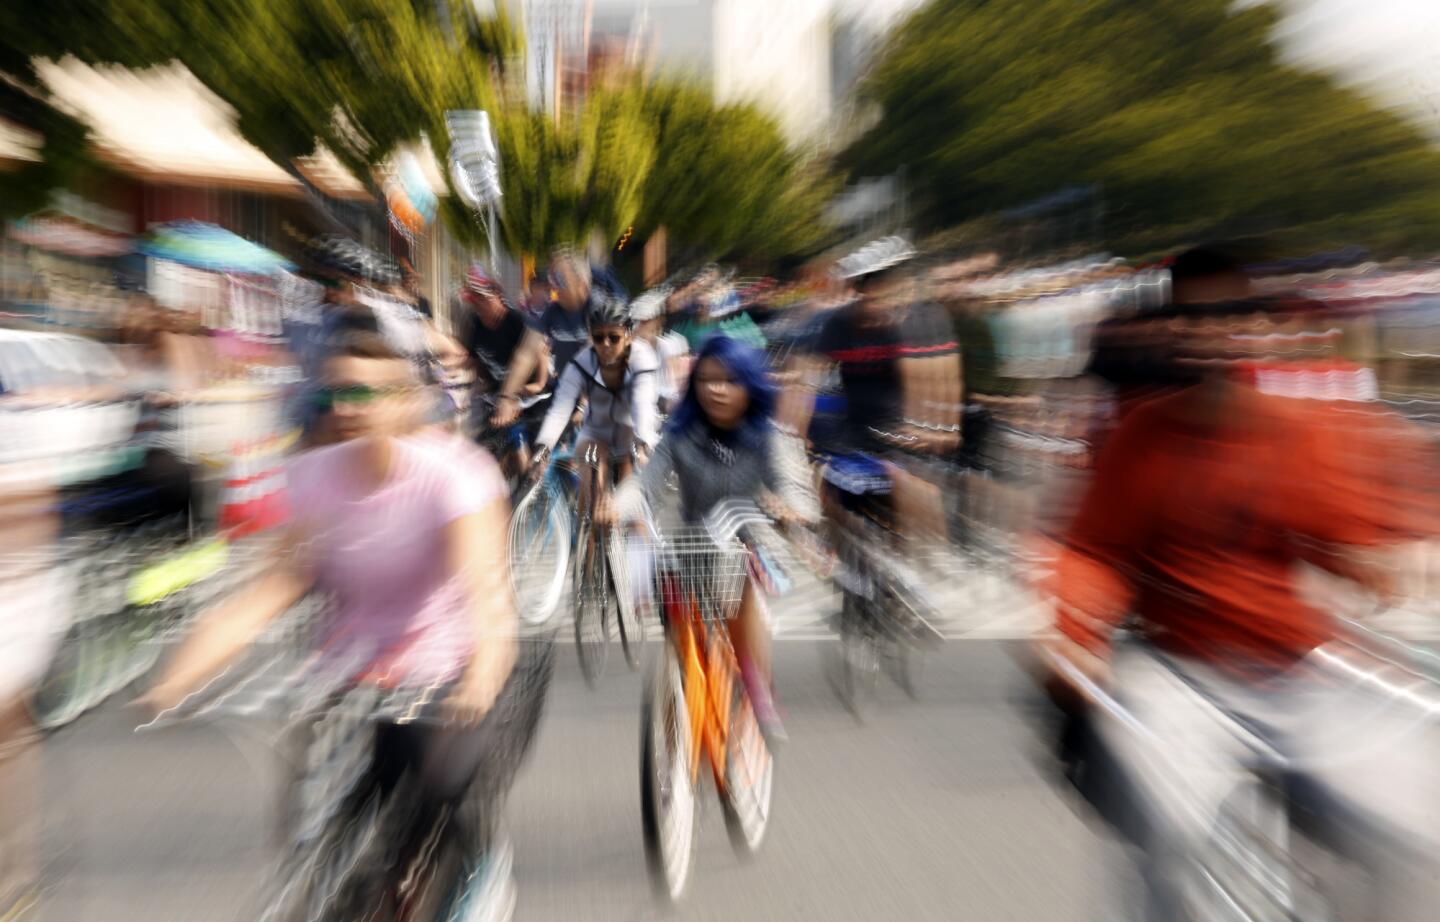 Thousands of cyclists, skaters and pedestrians make their way down Venice Boulevard while participating in CicLAvia in Mar Vista on Sunday morning.